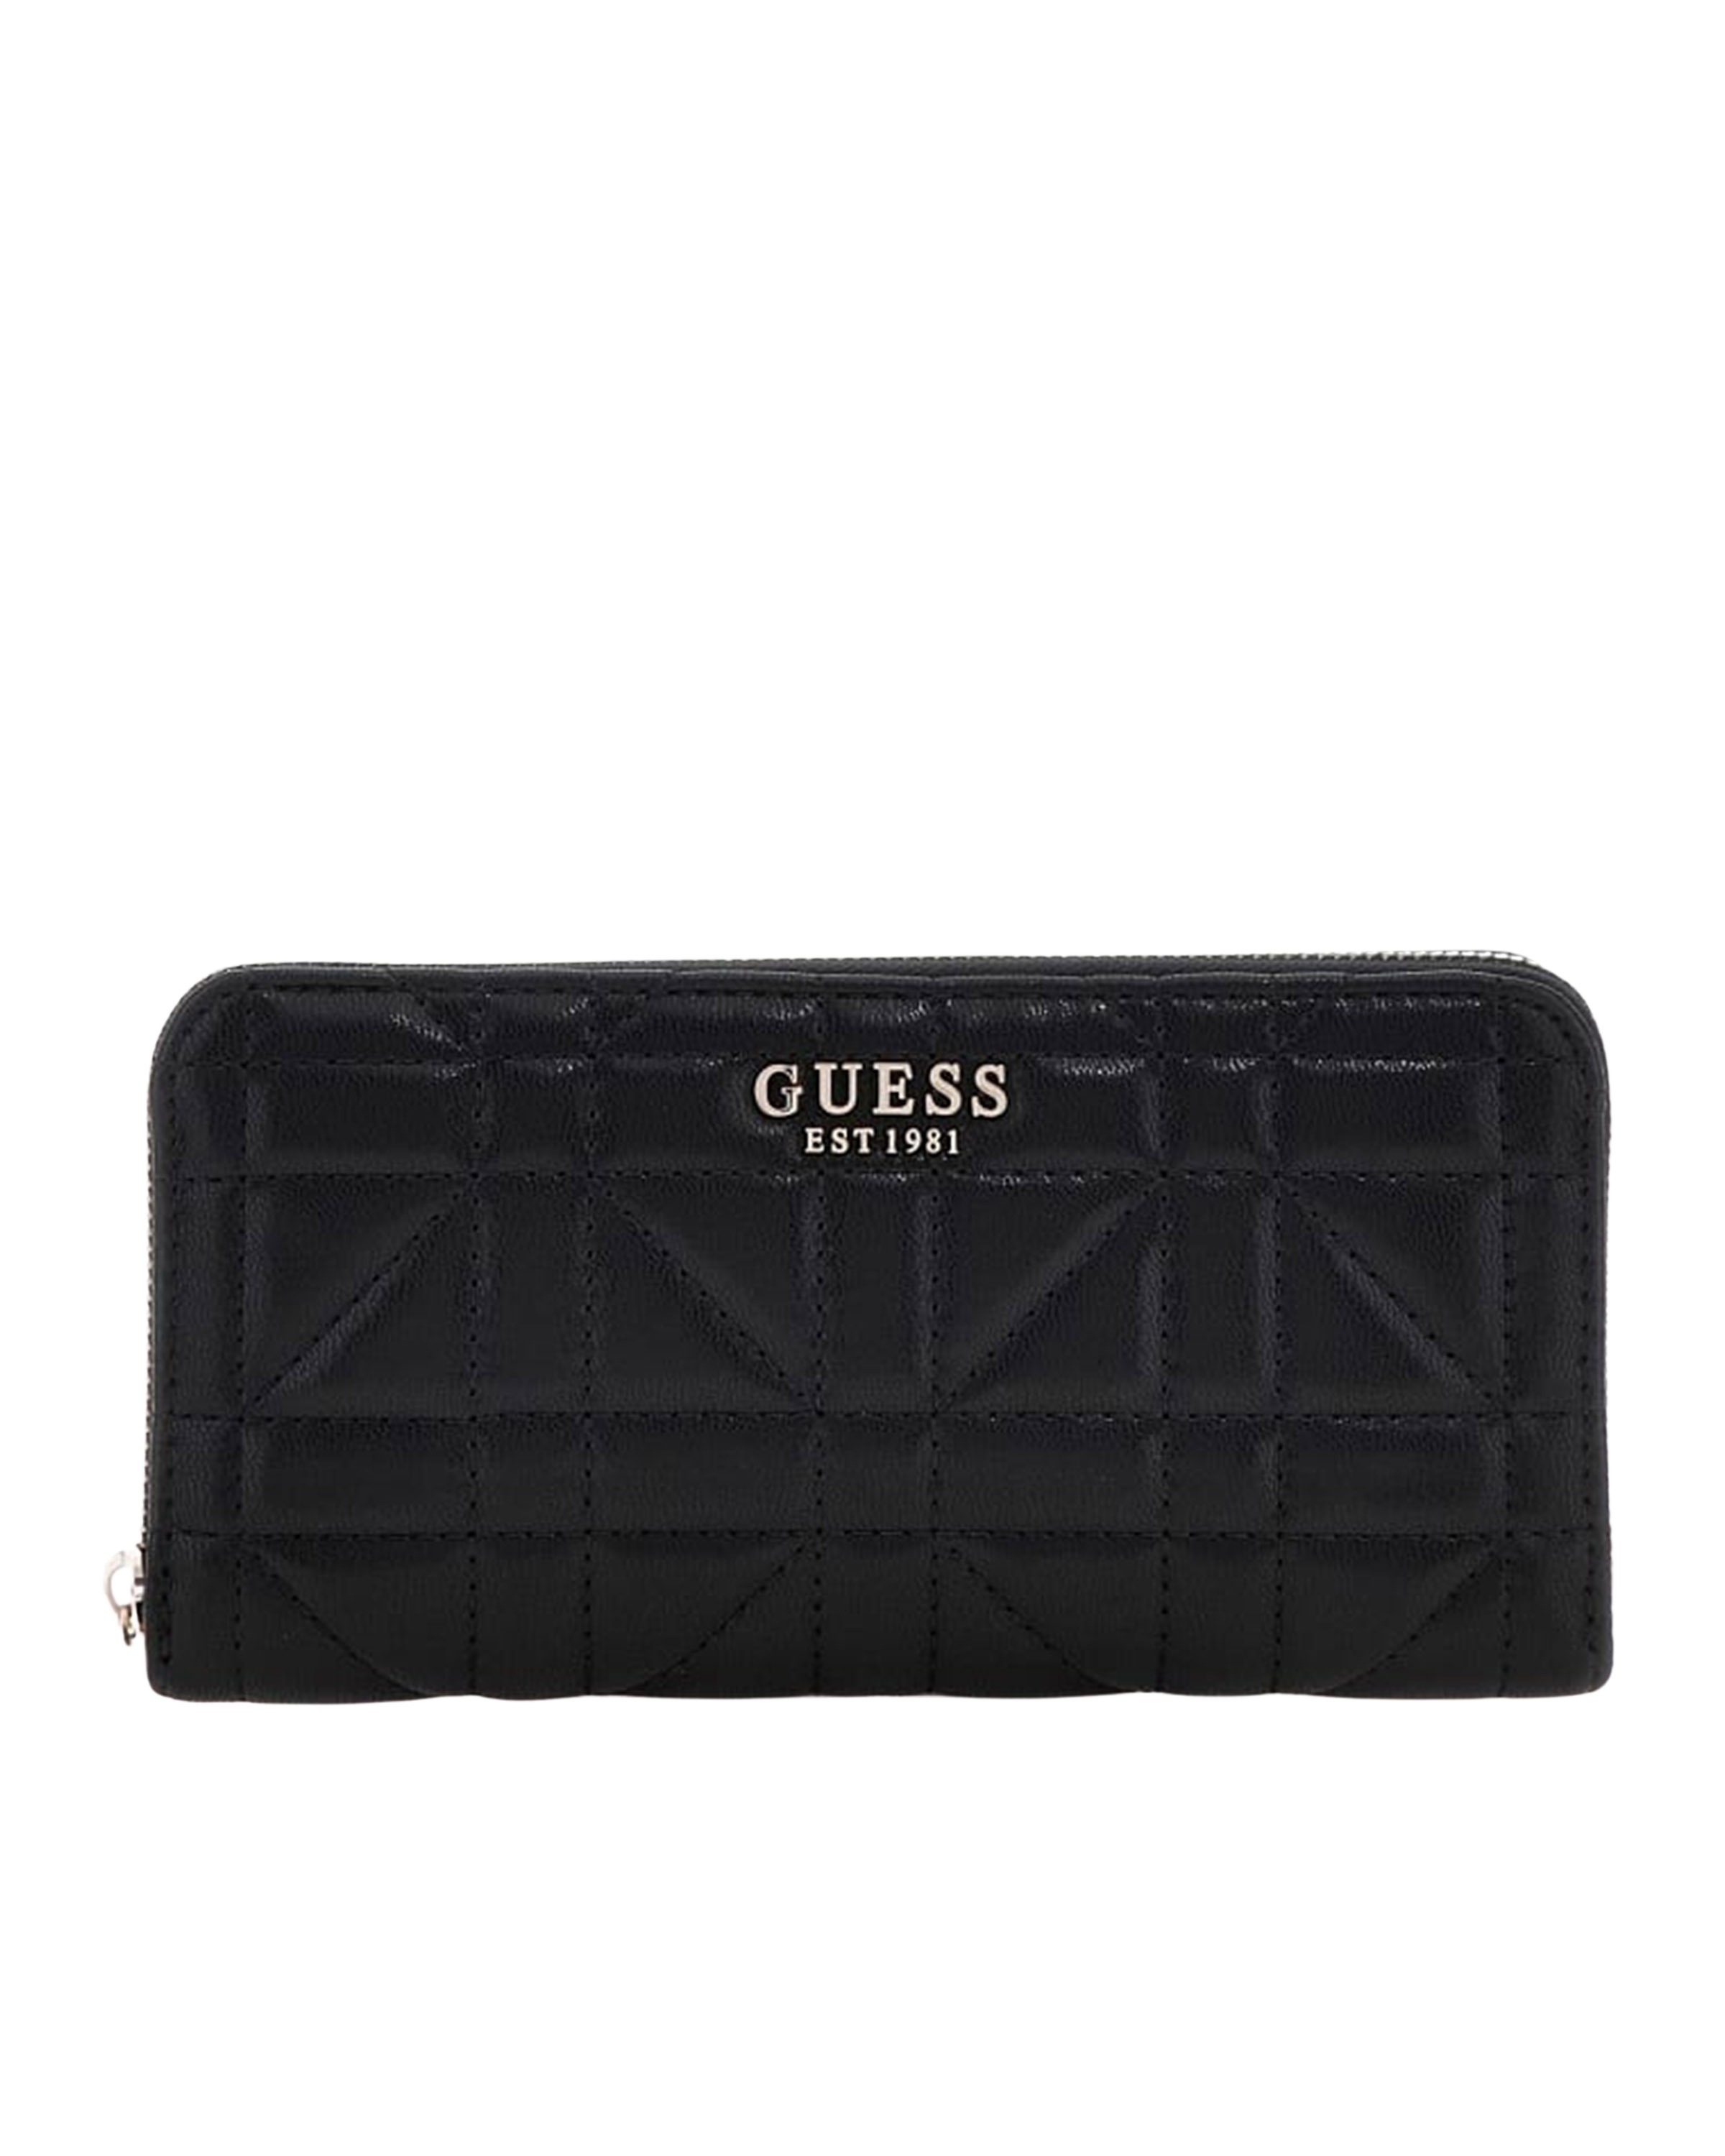 Guess Assia large zip around portemonnee